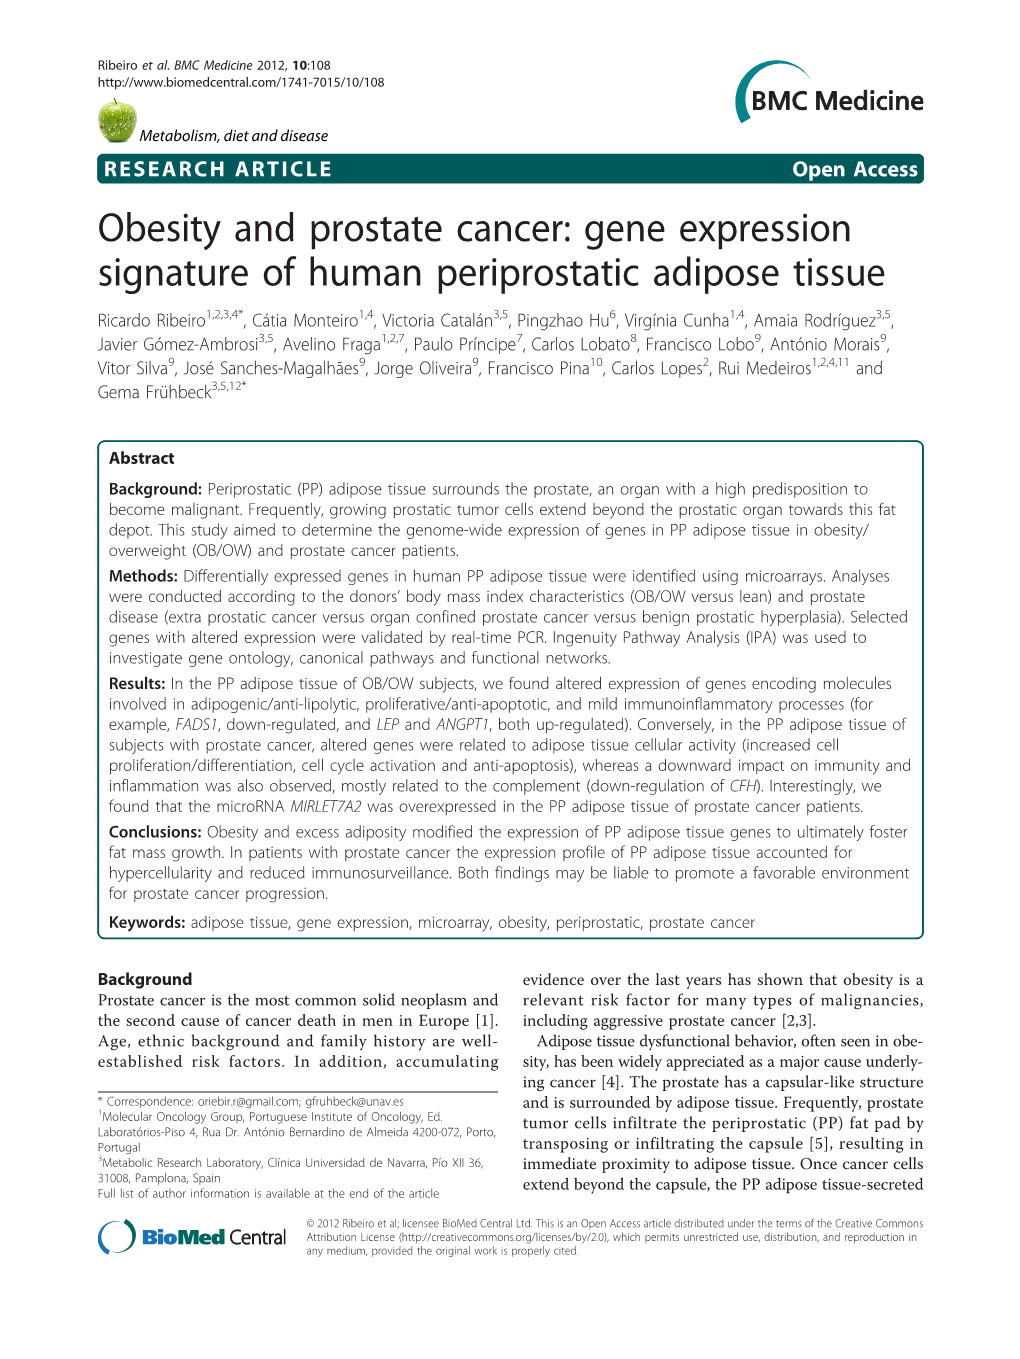 Obesity and Prostate Cancer